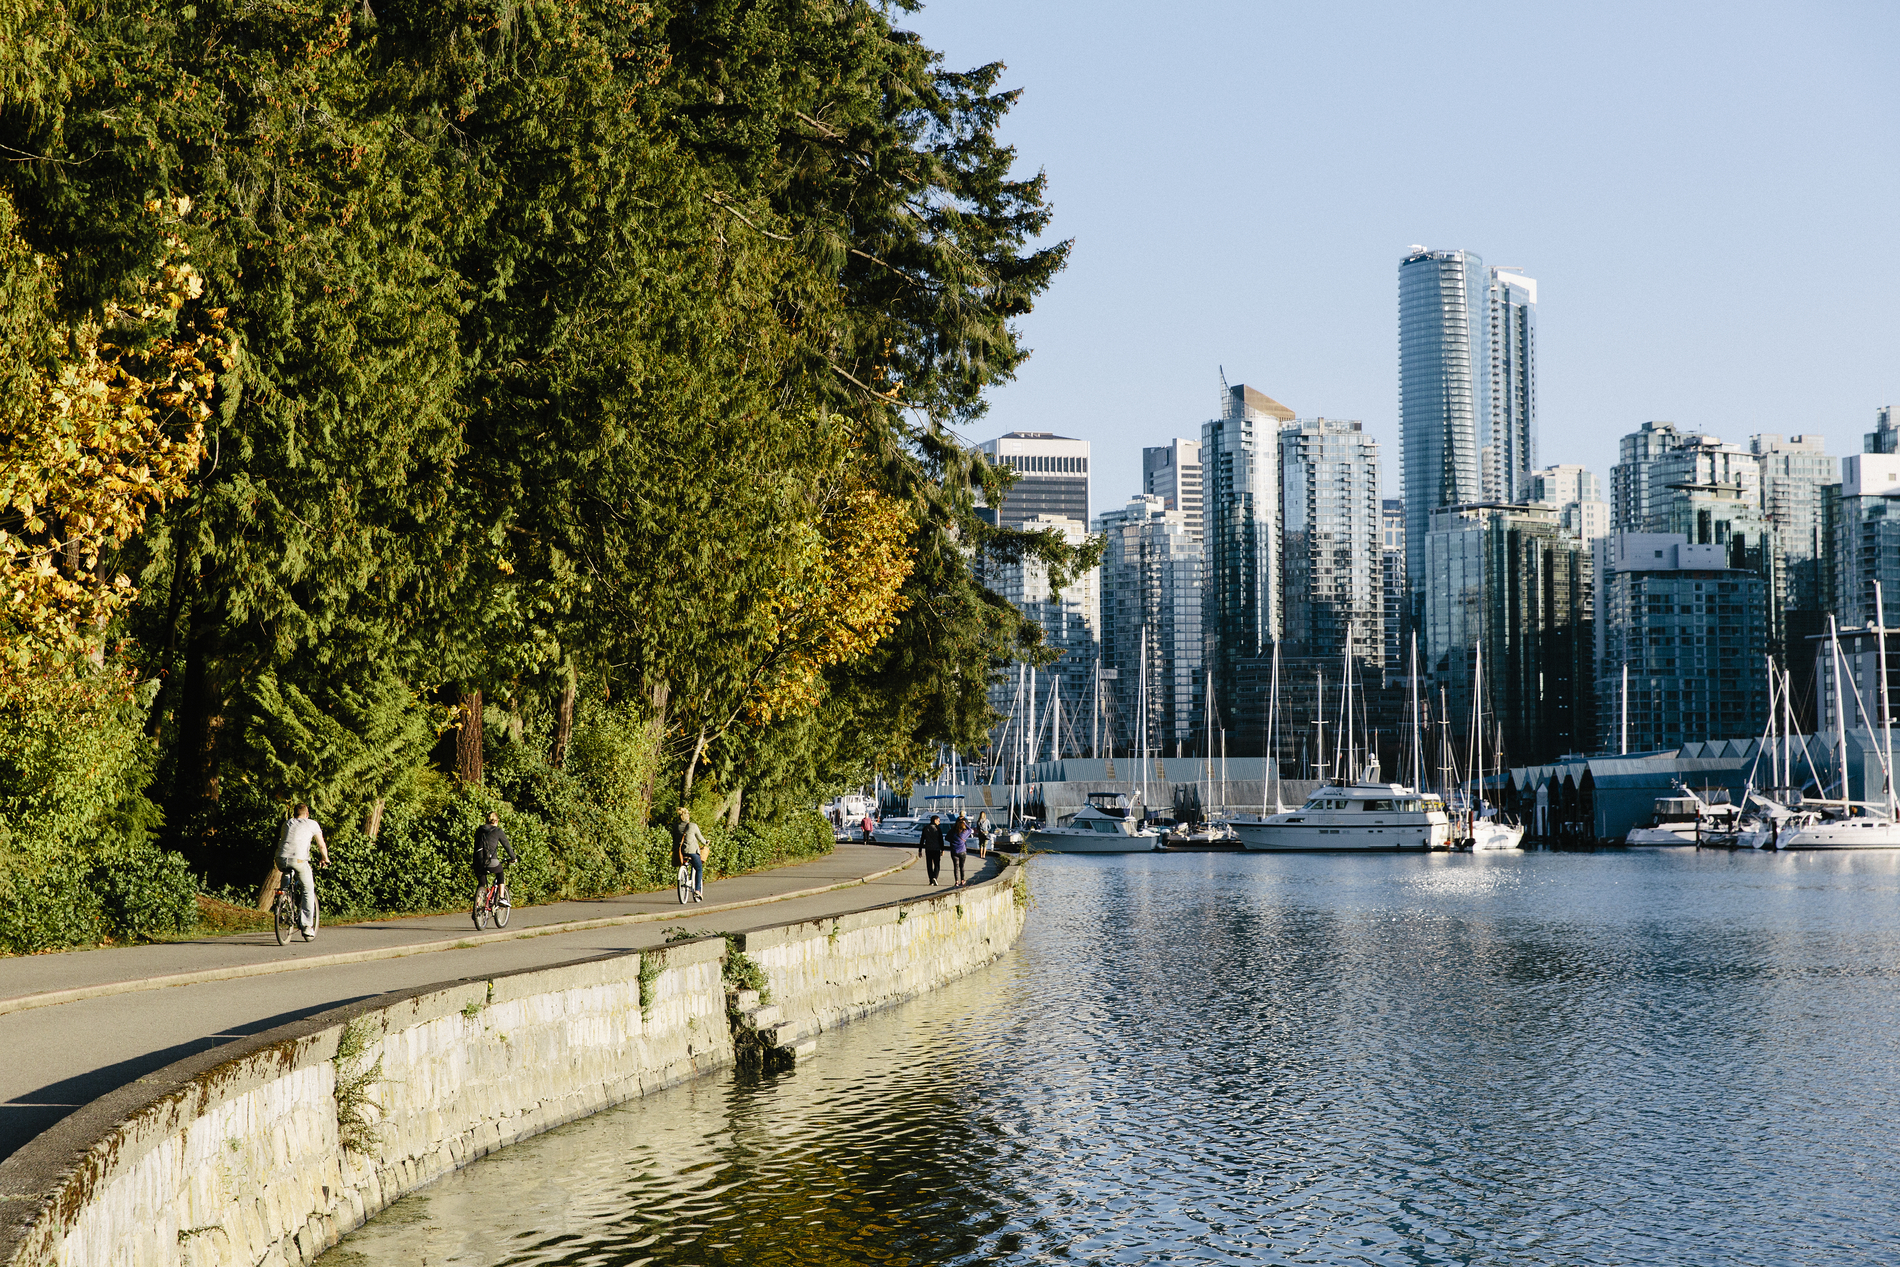 Cyclists and pedestrians riding around the Stanley Park Seawall with trees to the left of the elevated path and the water and the highrises of the city to the right